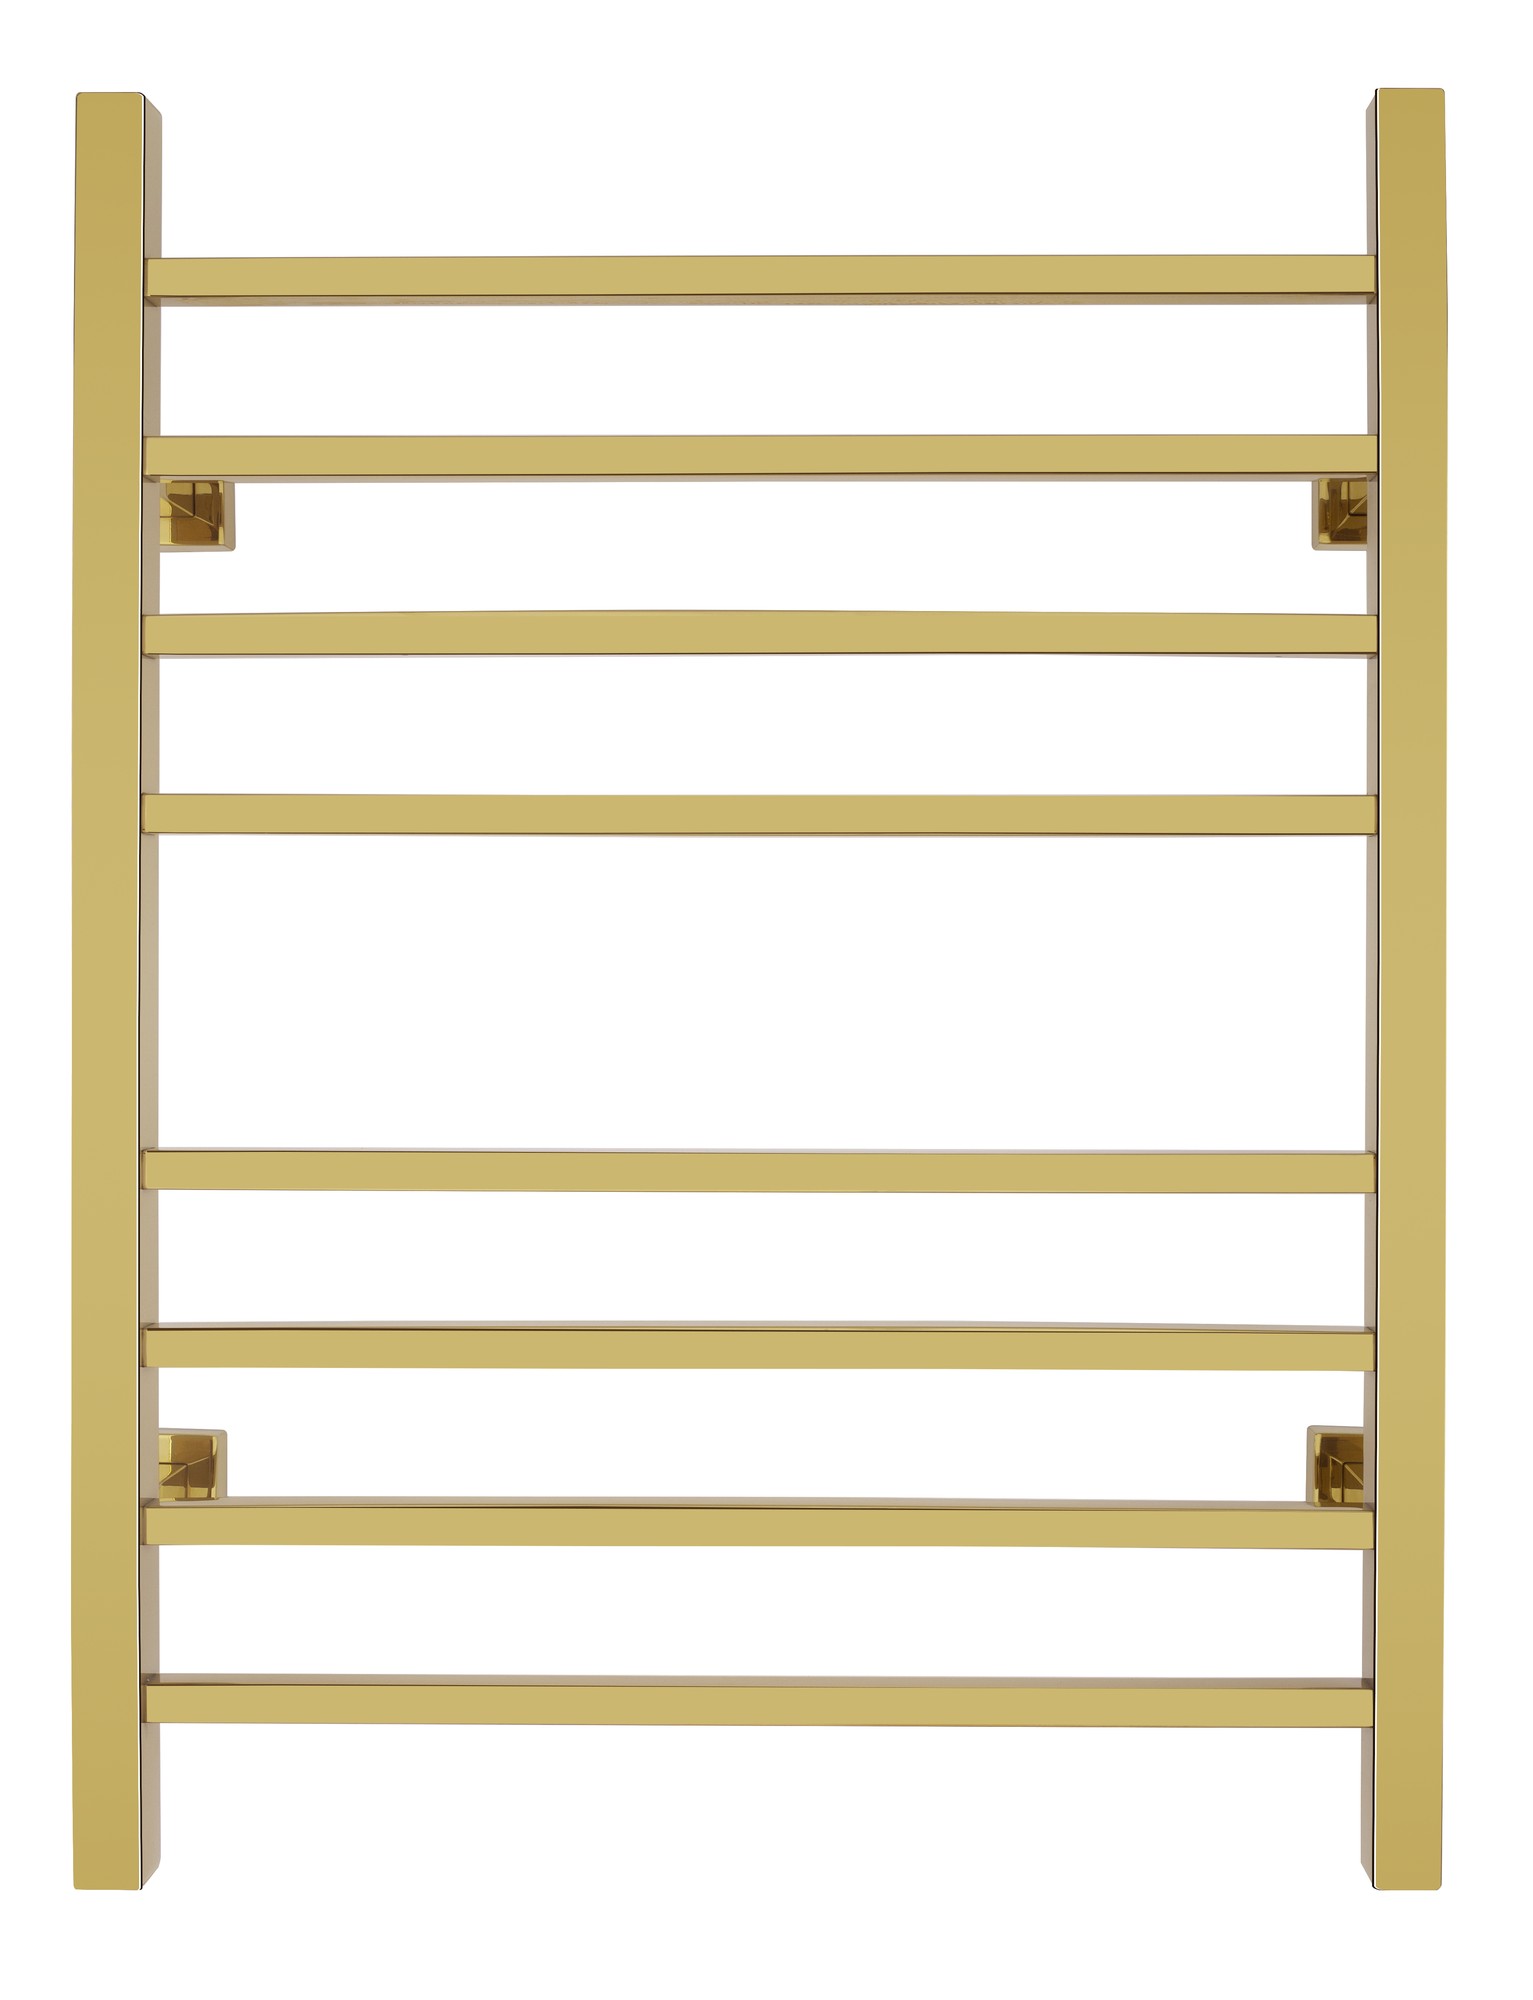 Sierra Towel Warmer, Polished Gold, Dual Connection, 8 Bars